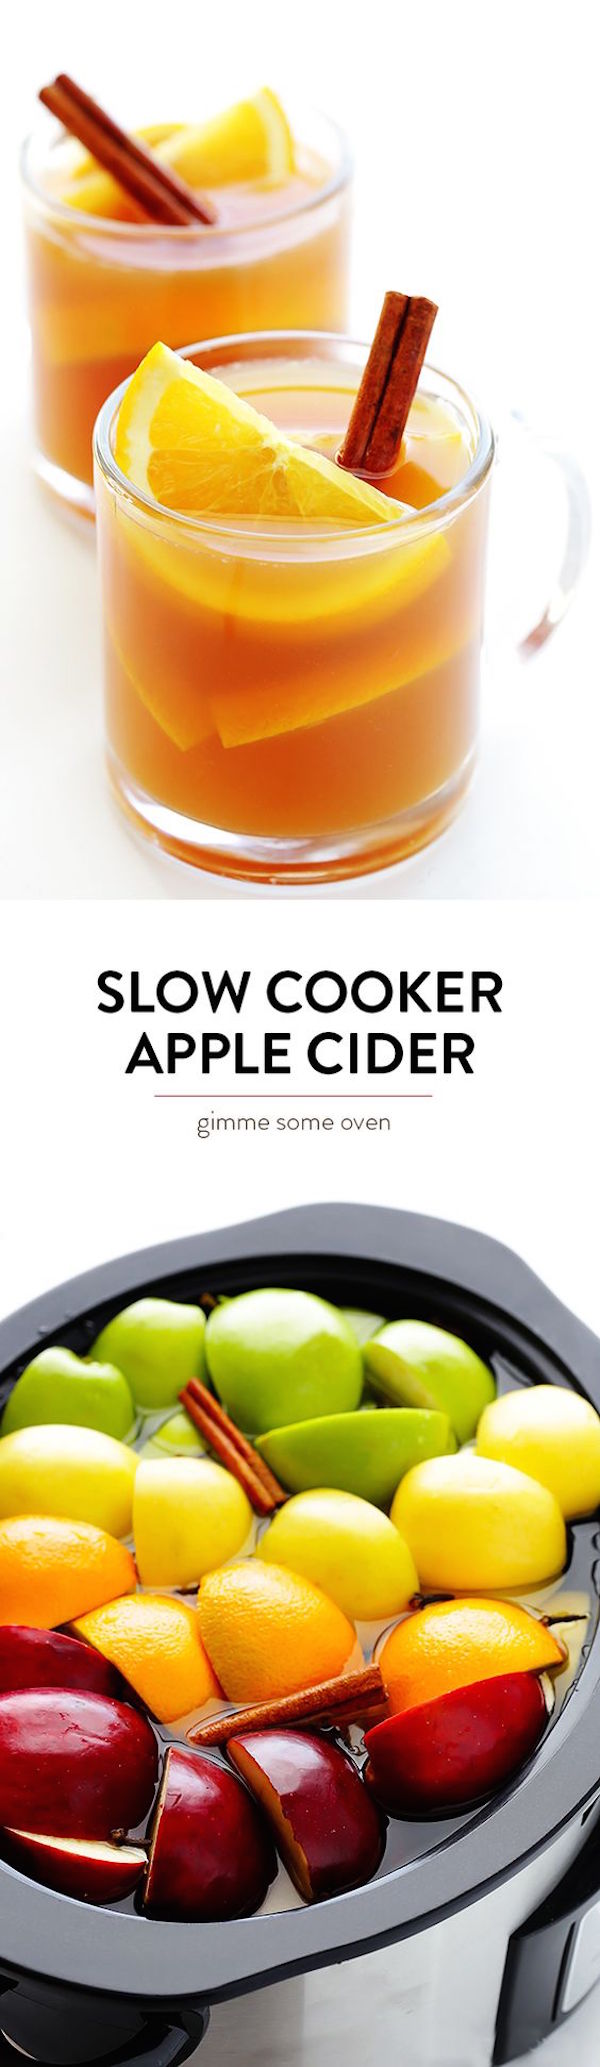 This slow cooker apple cider is made 100% from scratch, and is super simple and also easy to customize to your preferred taste. It makes your whole house smell delicious and it's a fun recipe for the kids to enjoy too. Don't forget to make it again at Christmas! 